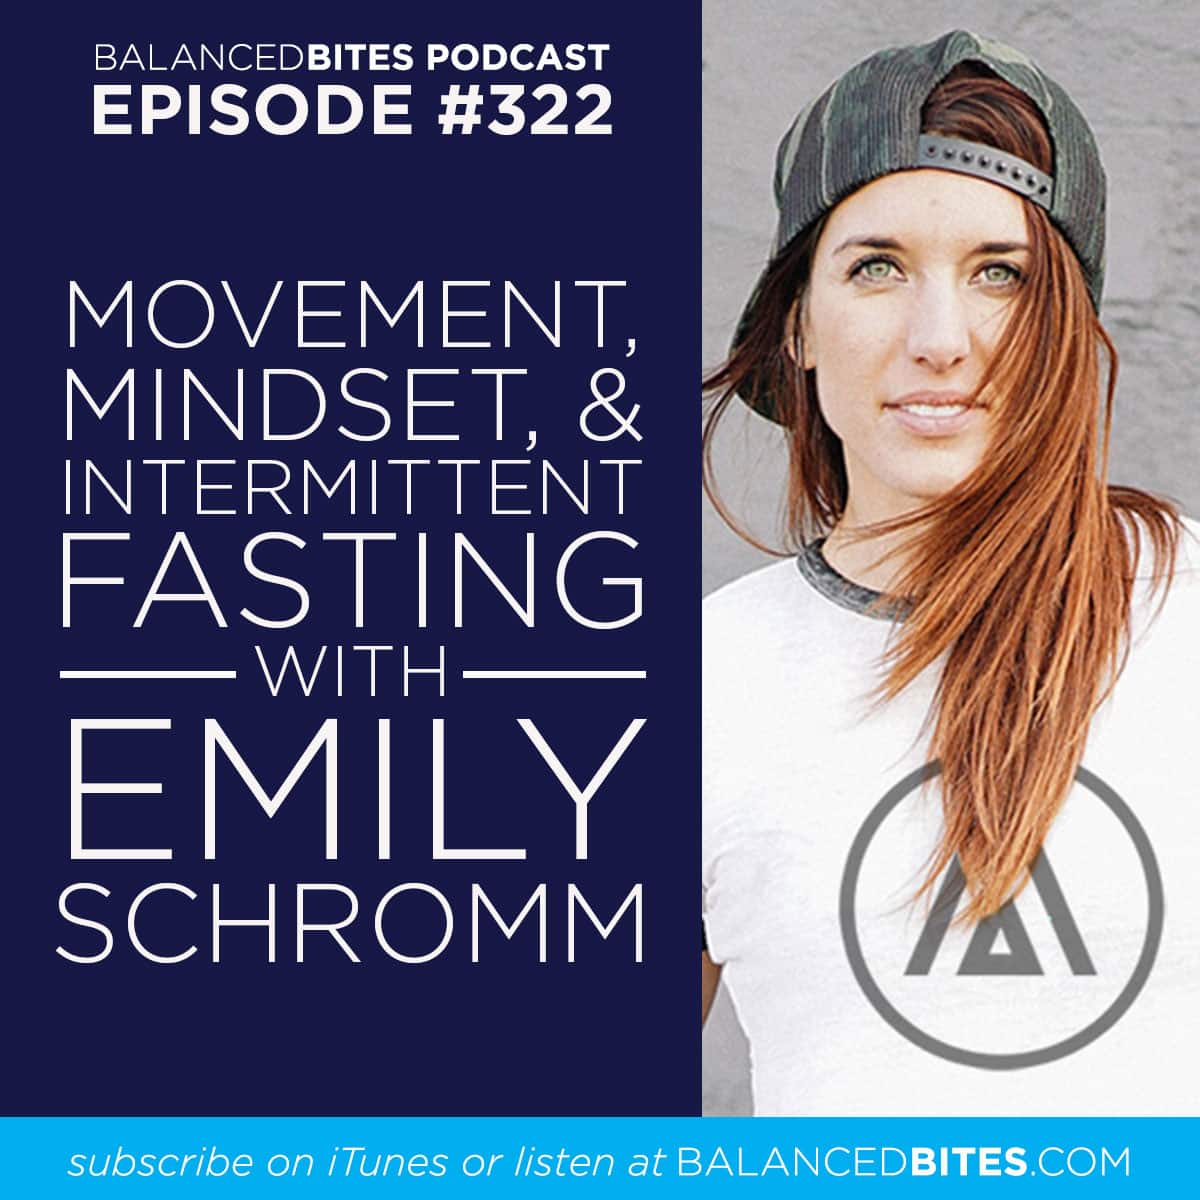 Movement, Mindset, & Intermittent Fasting with Emily Schromm